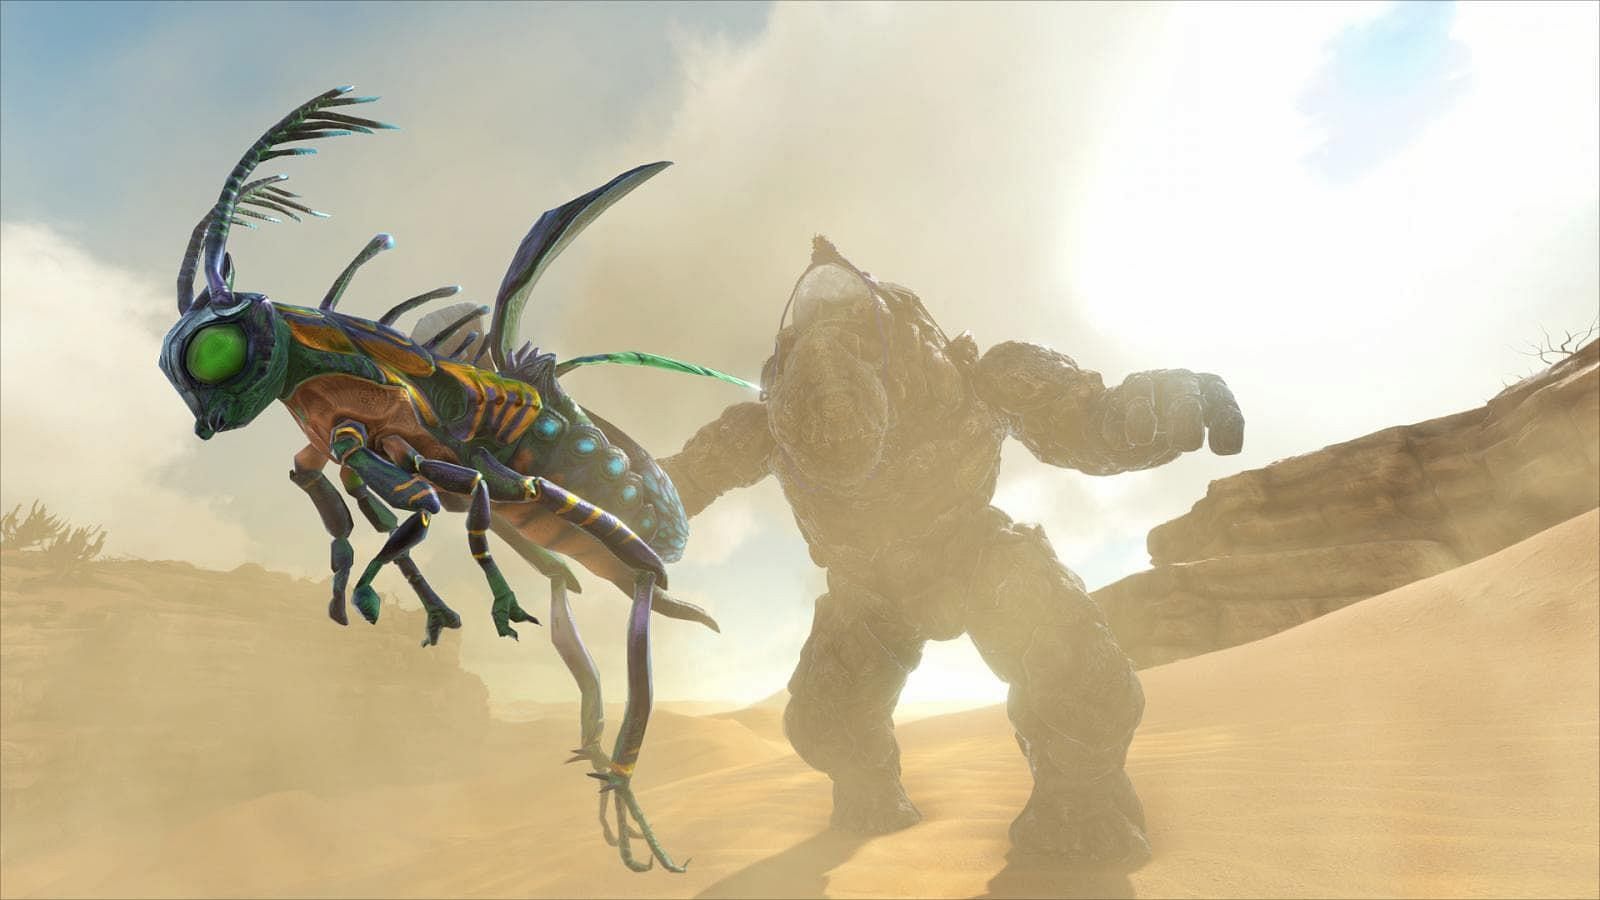 You can get Oil or Water from Jug Bugs in ARK (Image via Studio Wildcard)